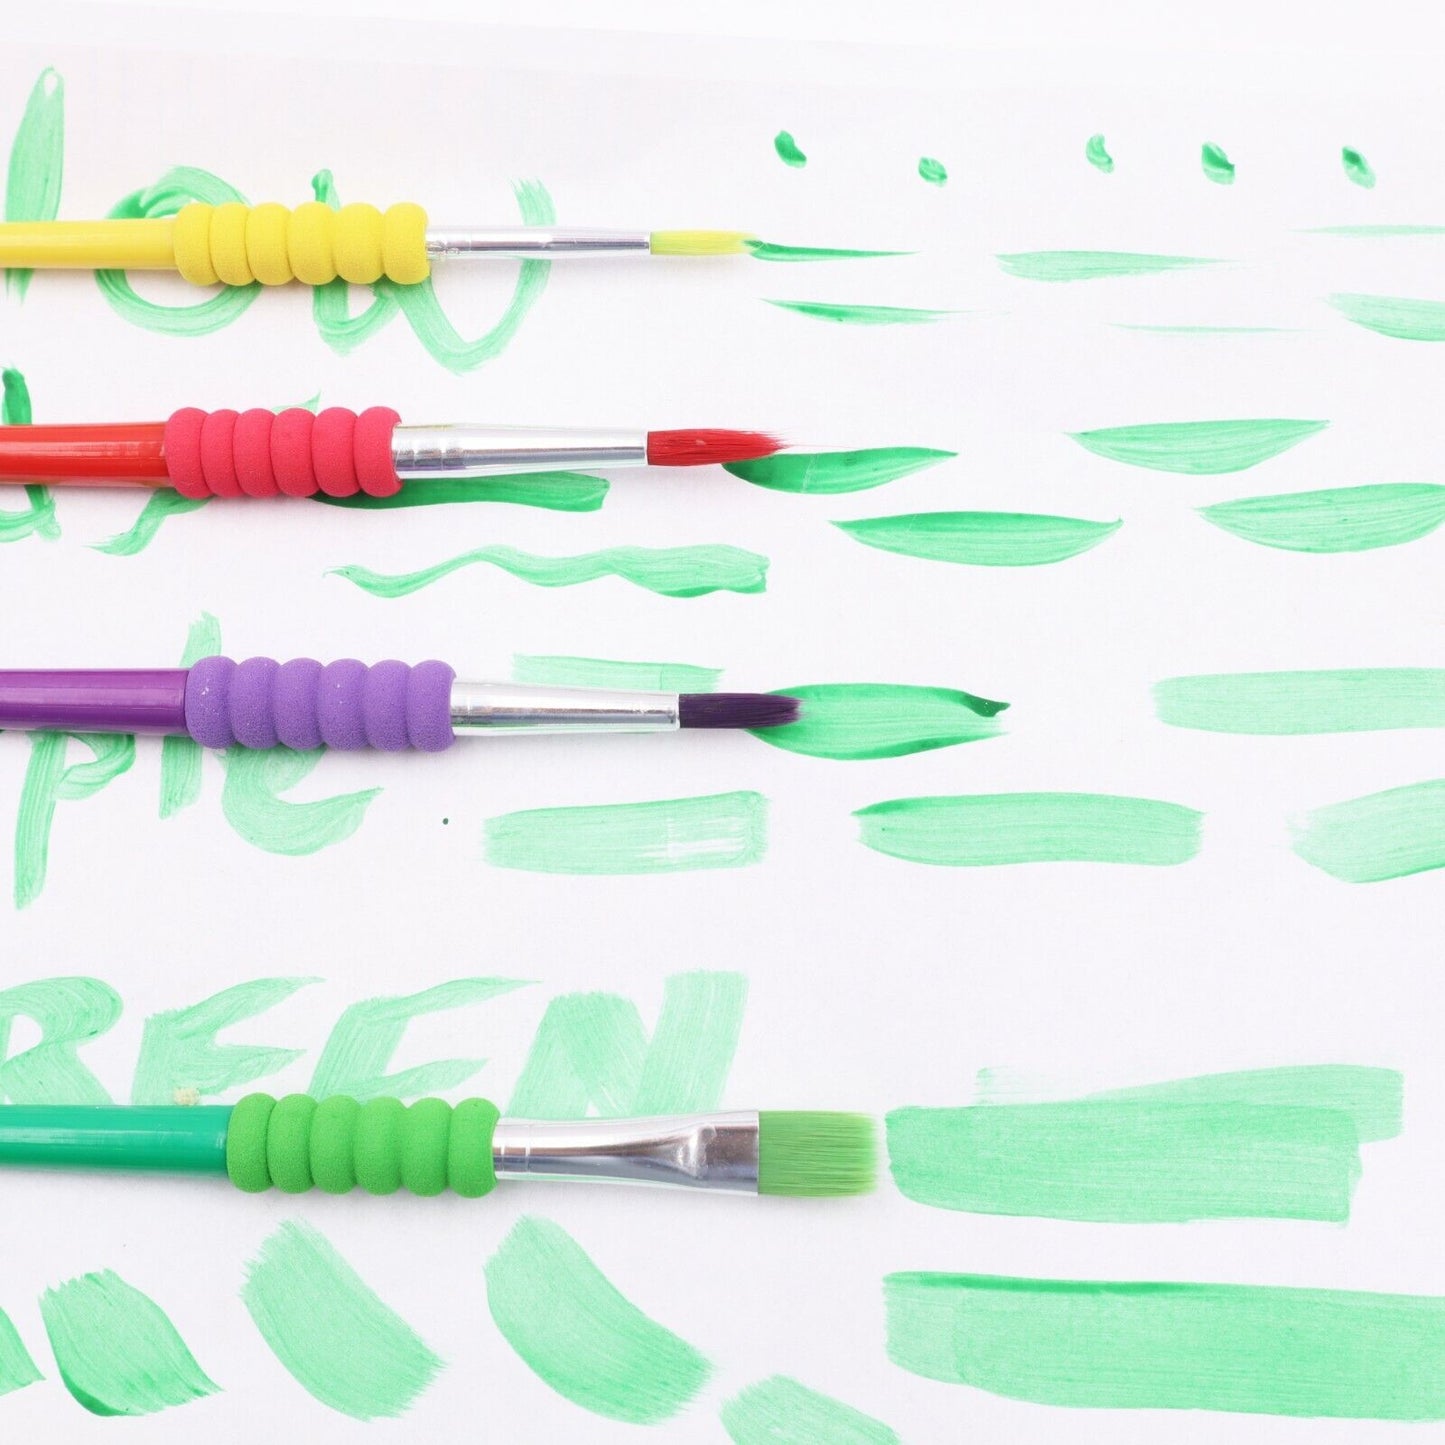 4 Fine Paint Brushes | Learning and Exploring Through Play